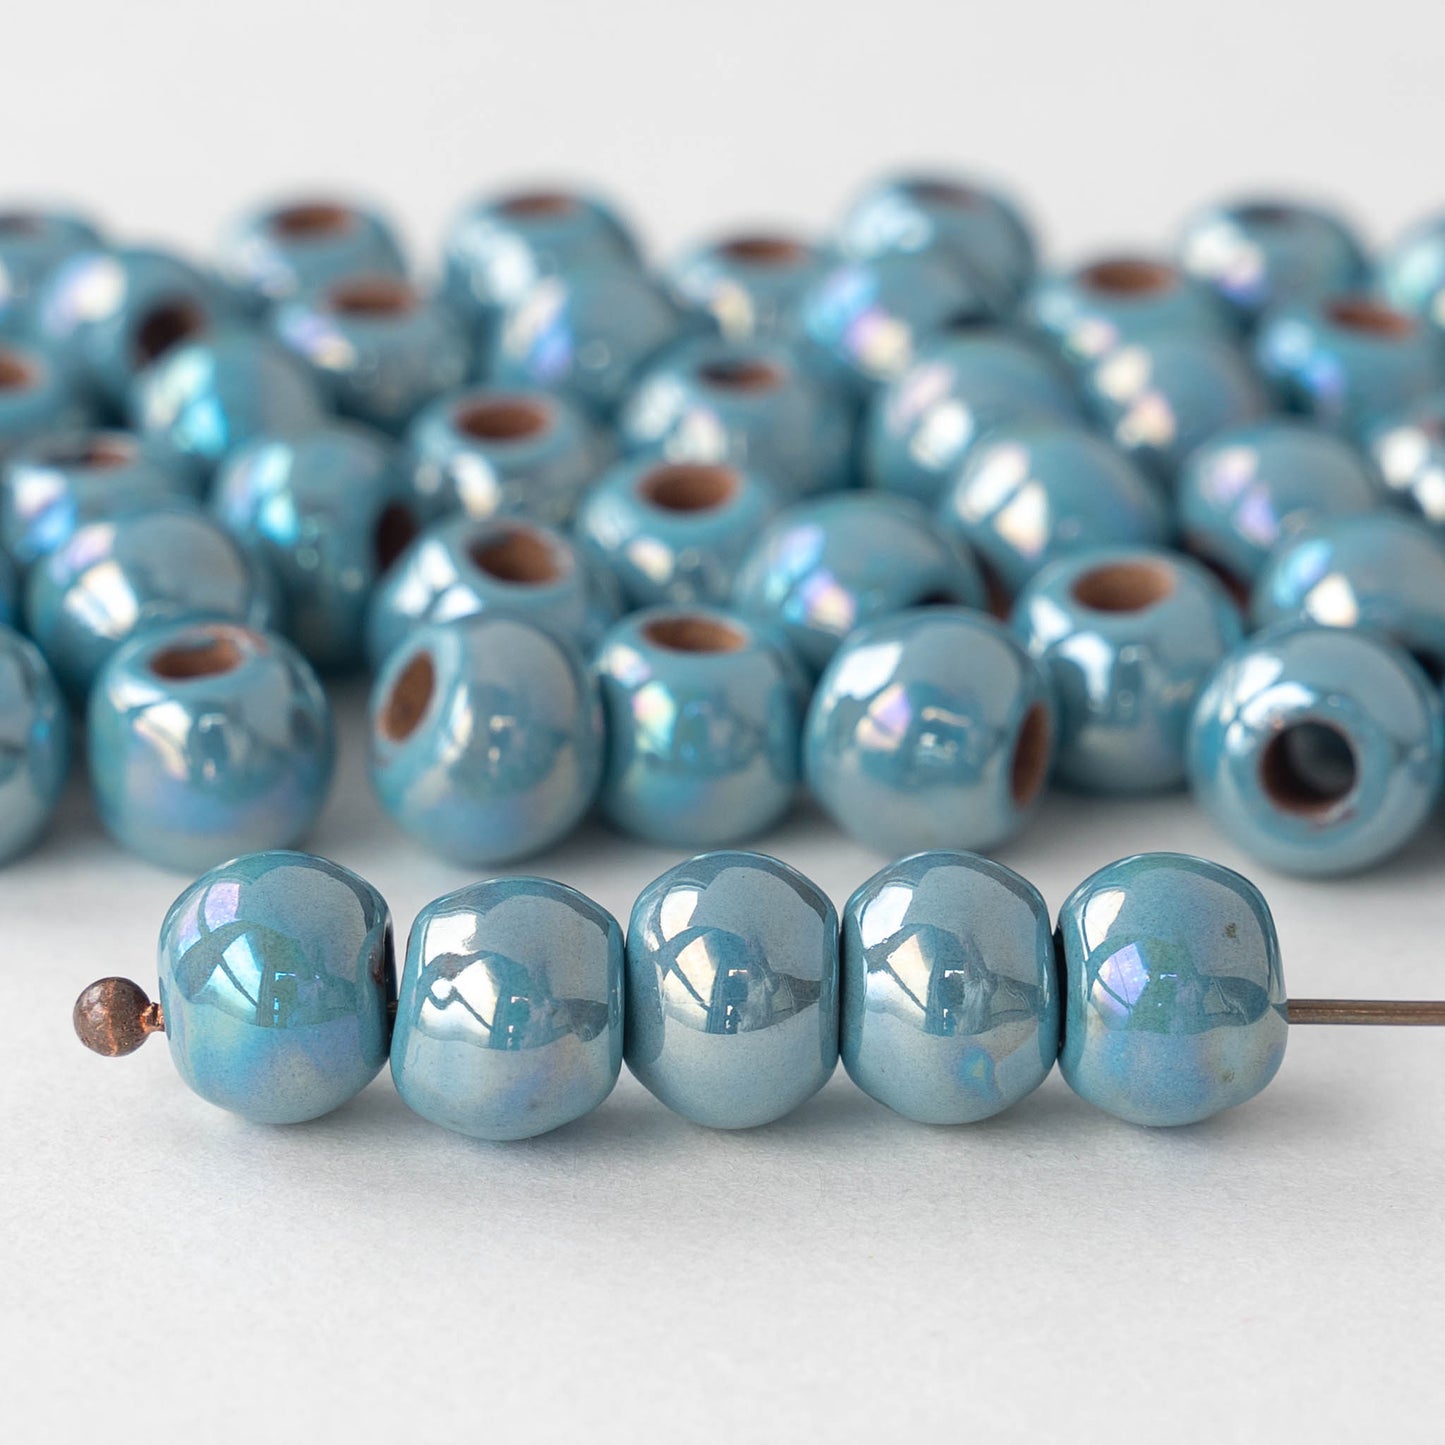 10mm Iridescent Clear Round Beads on a Spool, 66 Feet - That Bohemian Girl